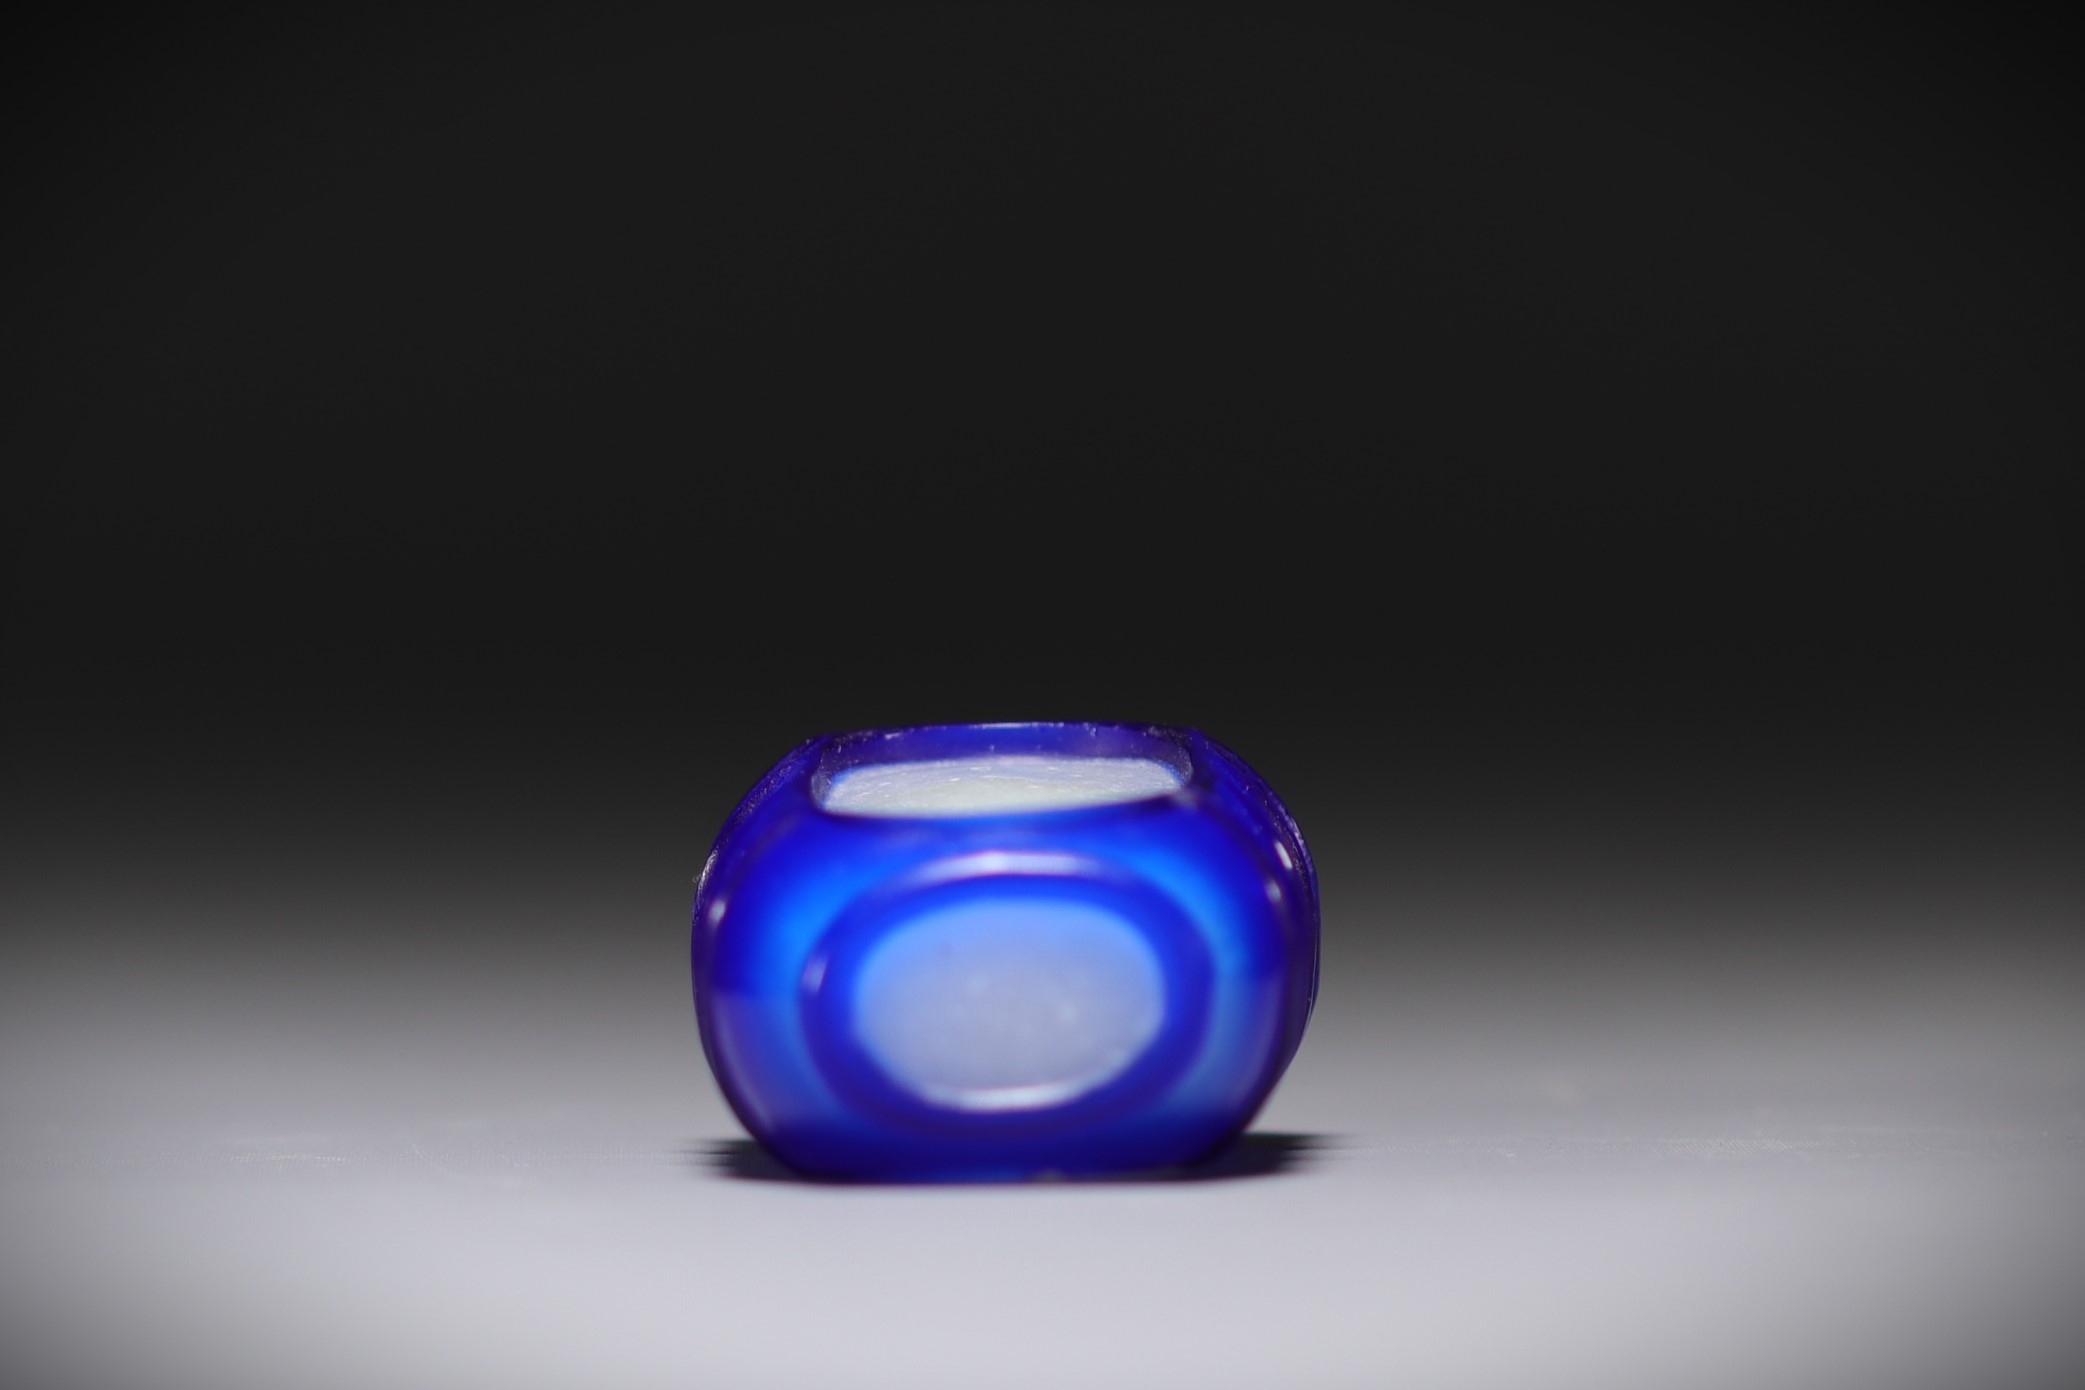 China - Snuffbox in white and blue multi-layered glass - Image 4 of 4